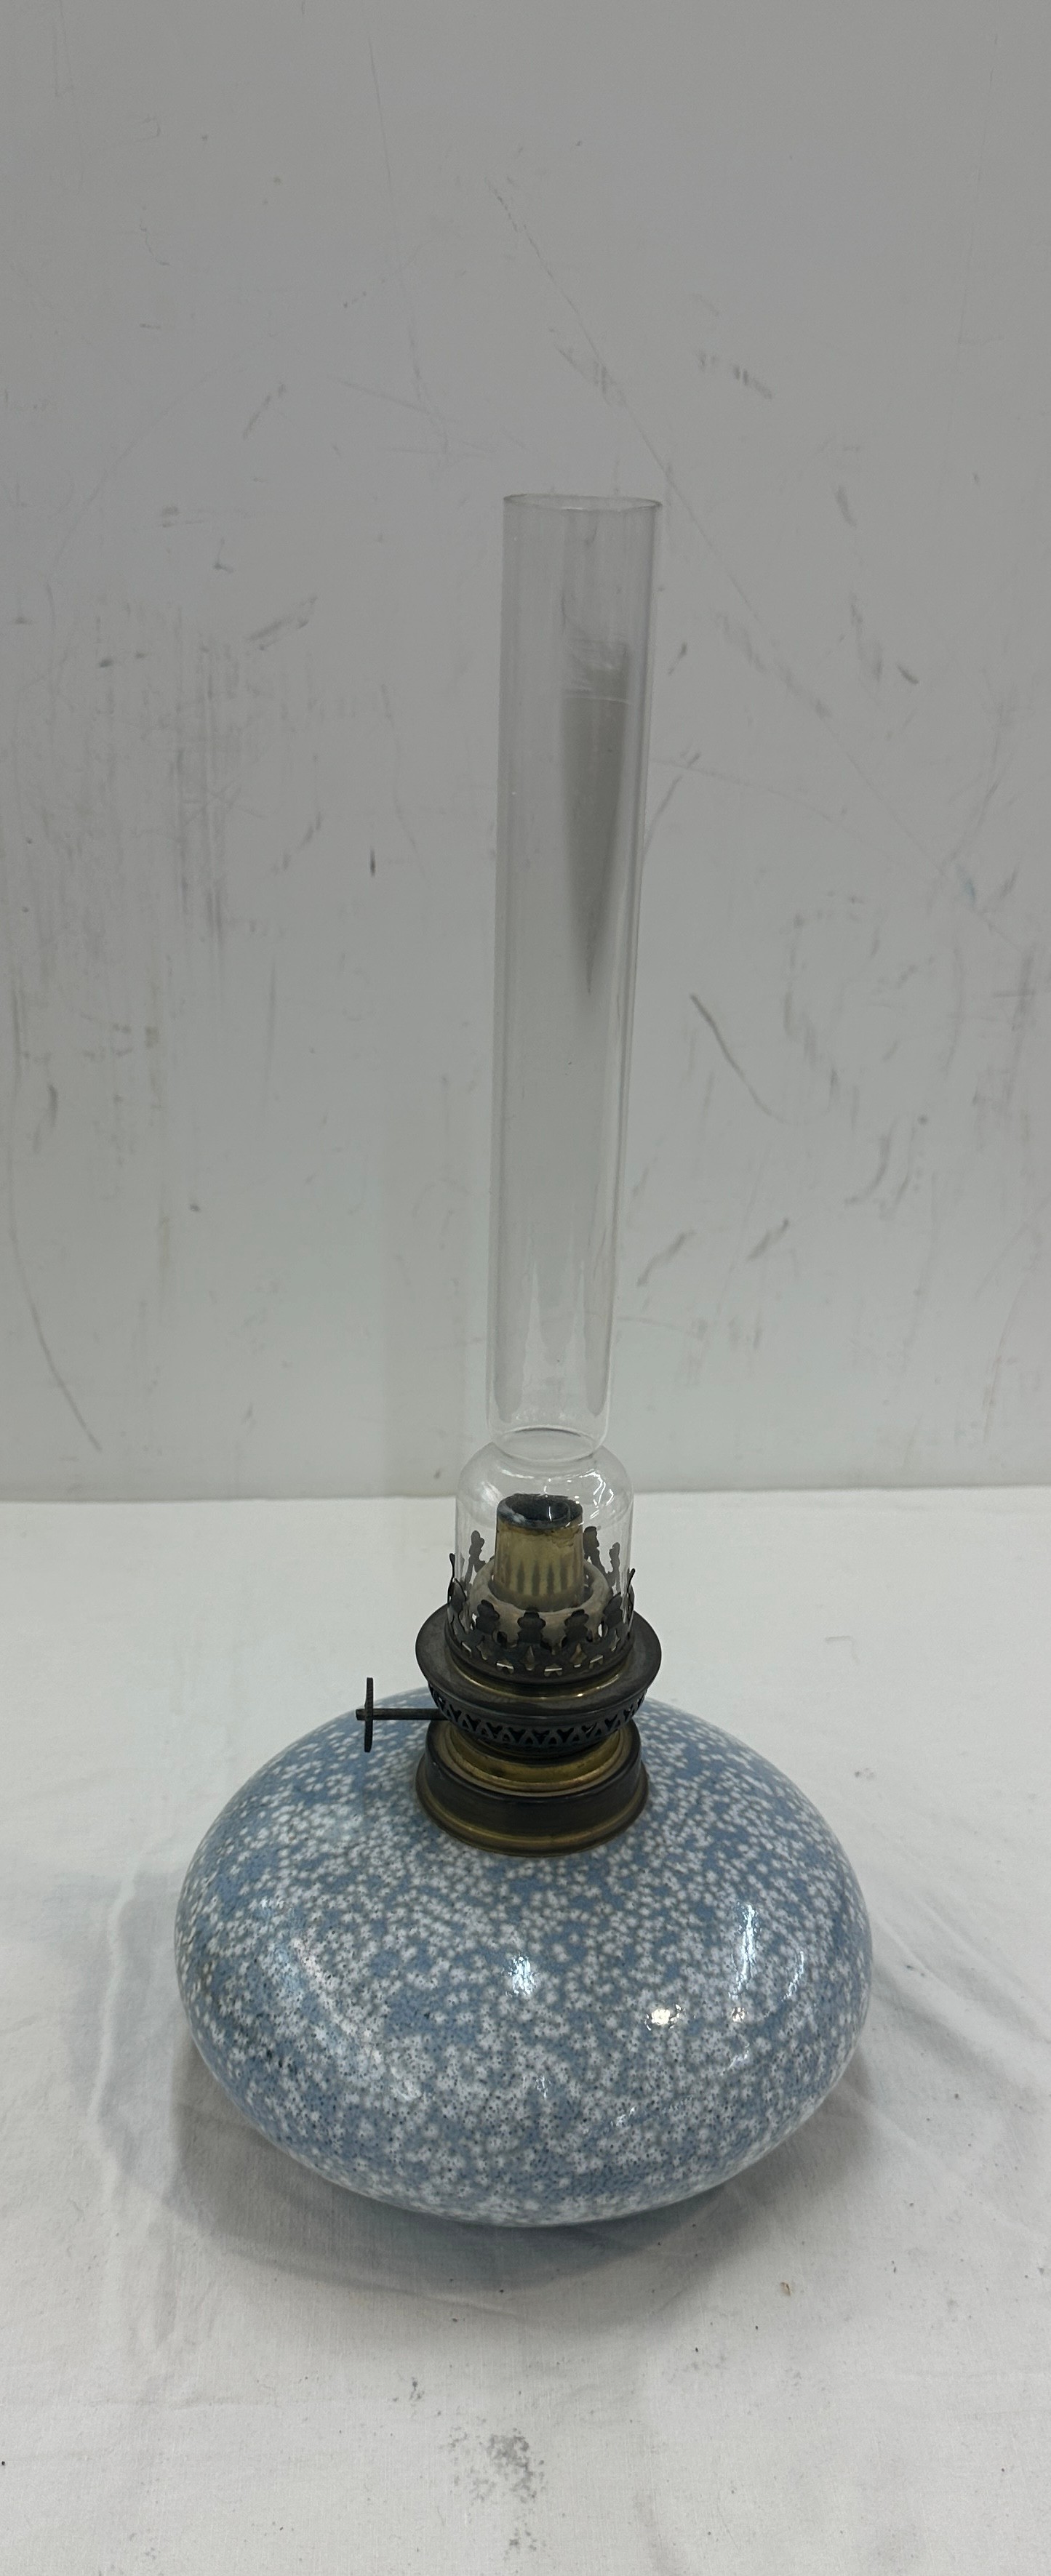 Vintage oil lamp and funnel, height including funnel 17 inches tall - Bild 3 aus 4